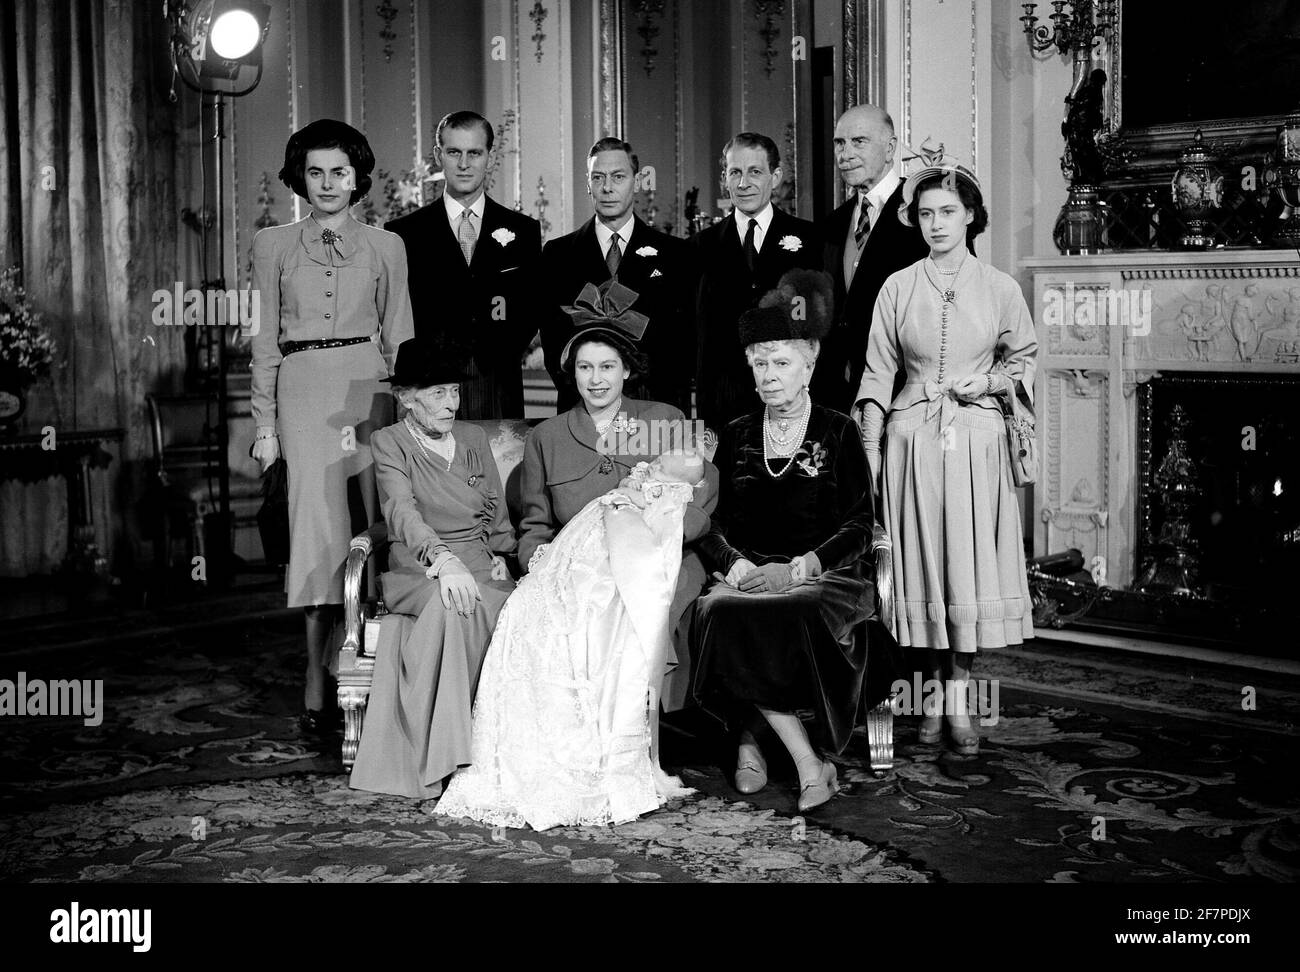 File photo dated 15/12/48 of Queen Elizabeth II holding her son, the Prince Charles after his christening in Buckingham Palace. With her seated to the left is Dowager Marchioness of Milford Haven, and right is the Prince's Great Grandmother Queen Mary. Godparents standing from left to right; Lady Brabourne, the Duke of Edinburgh (standing proxy for Prince George of Greece), King George VI, David Bowes-Lyon, the Earl of Athlone (who stood proxy for the King of Norway) and Princess Margaret. The Duke of Edinburgh has died, Buckingham Palace has announced. Issue date: Friday April 9, 2020.. See P Stock Photo